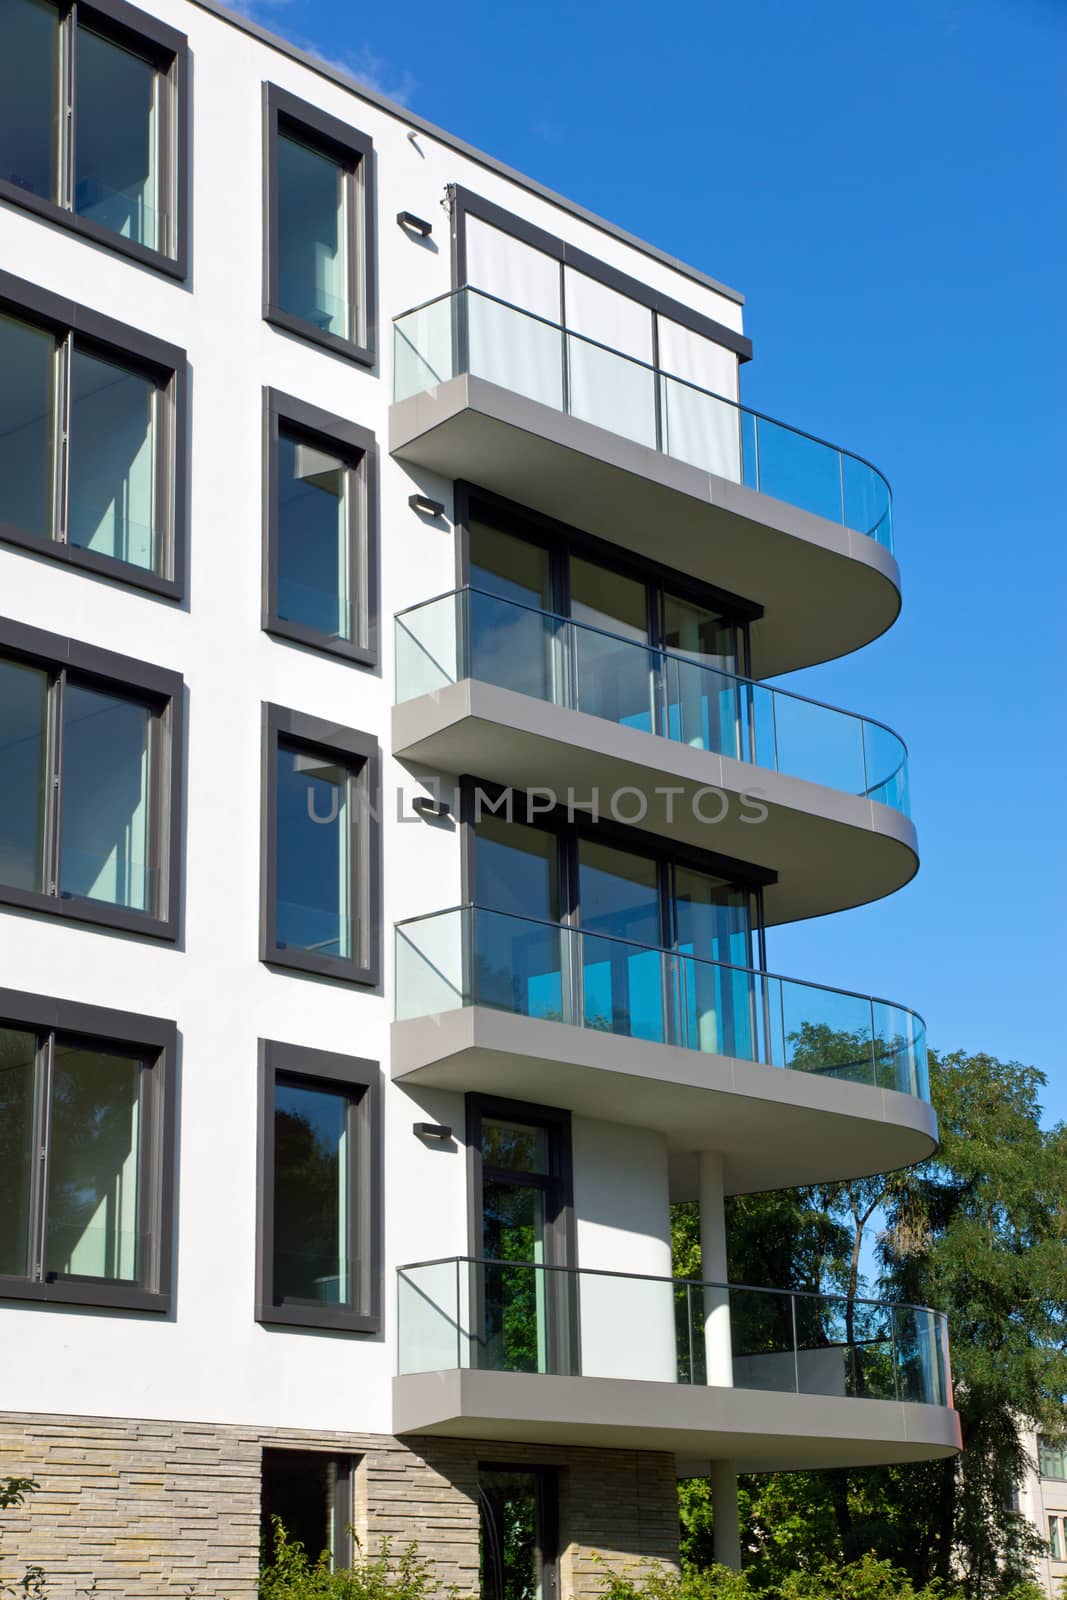 A modern apartment house with round balconies